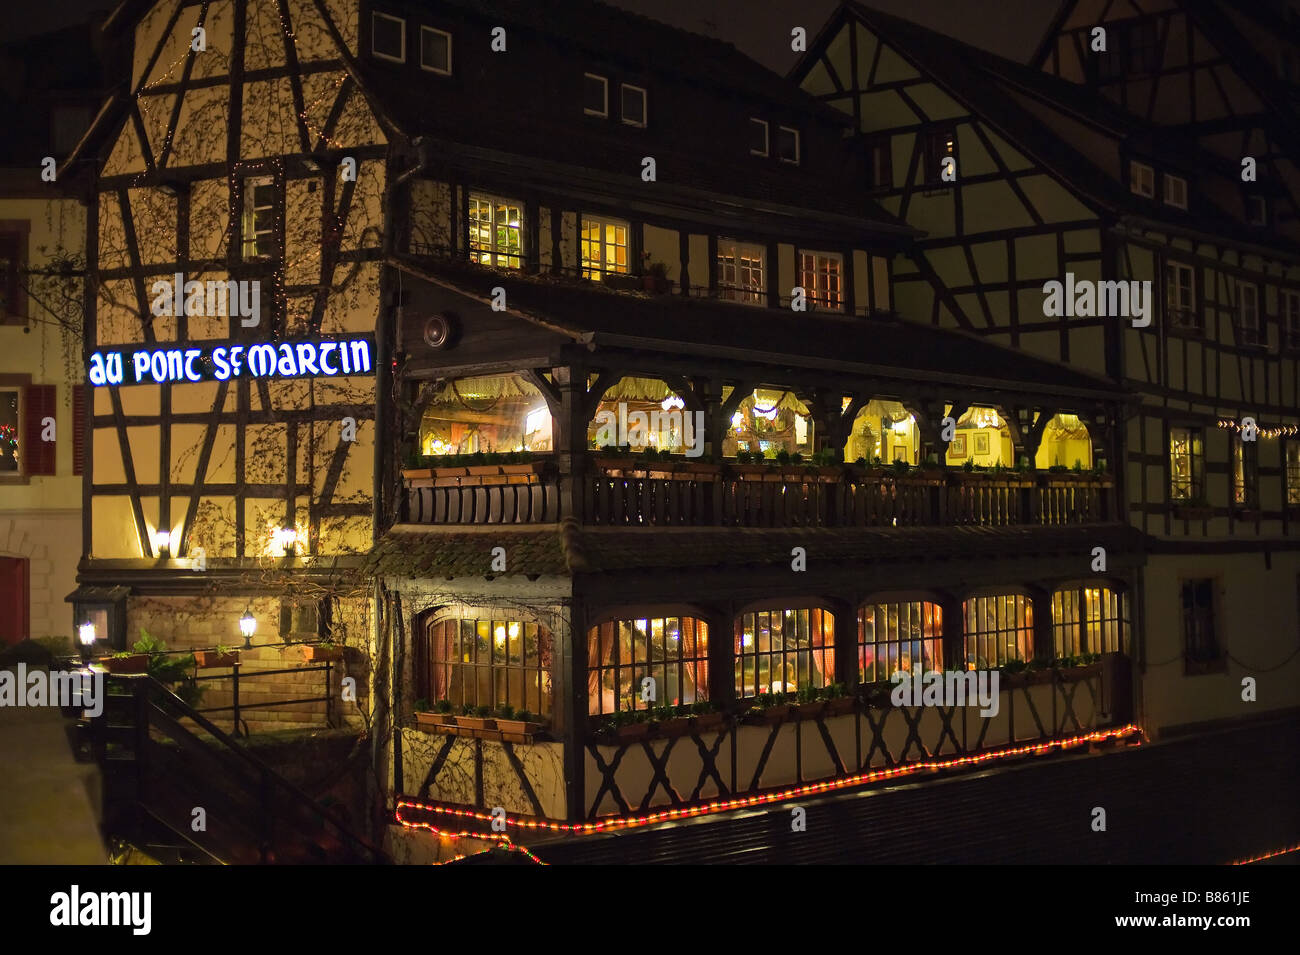 Half-timbered house with restaurant at night, La Petite France district, Strasbourg, Alsace, France Stock Photo